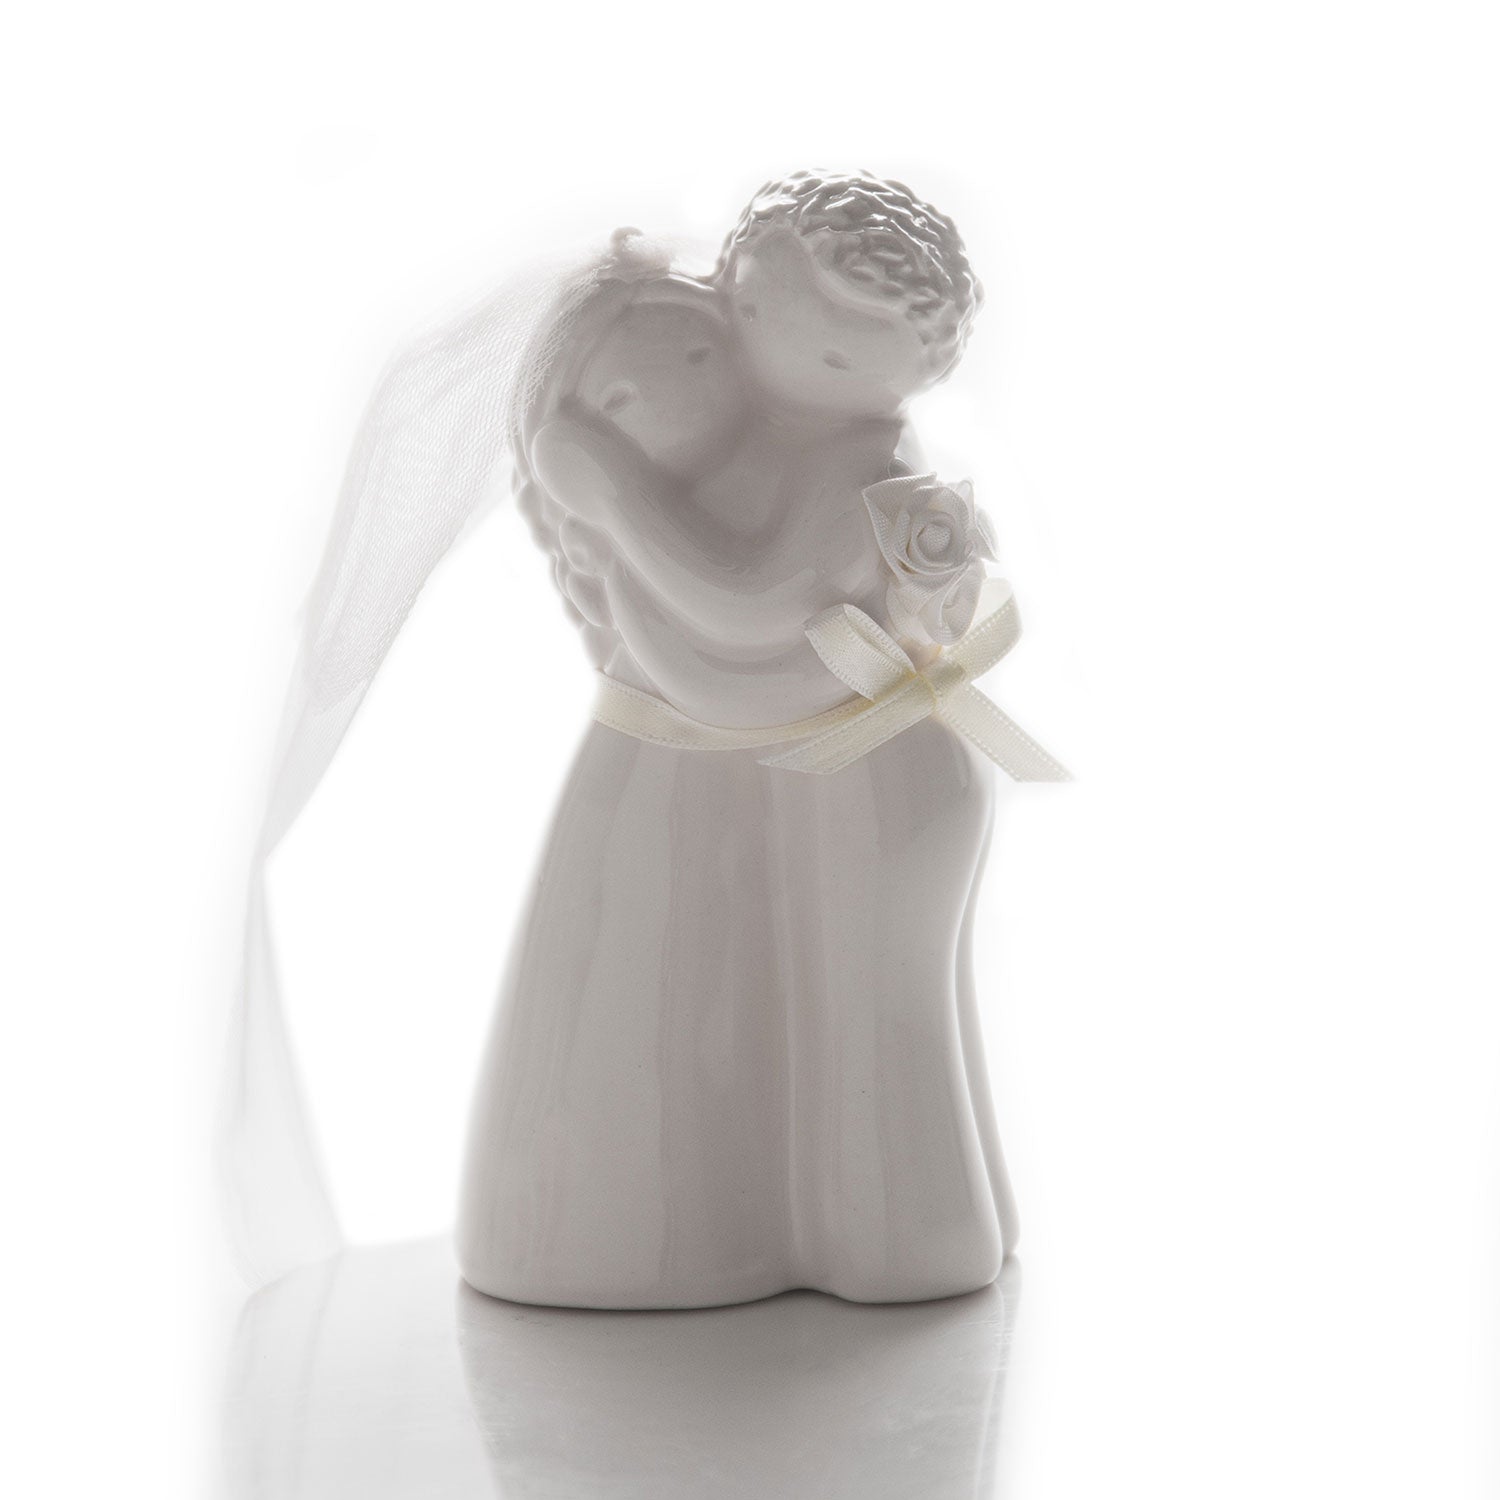 This 100% handmade in Portugal ceramic figurine is the perfect way to celebrate one of the most important days in someone’s life: the weeding day.